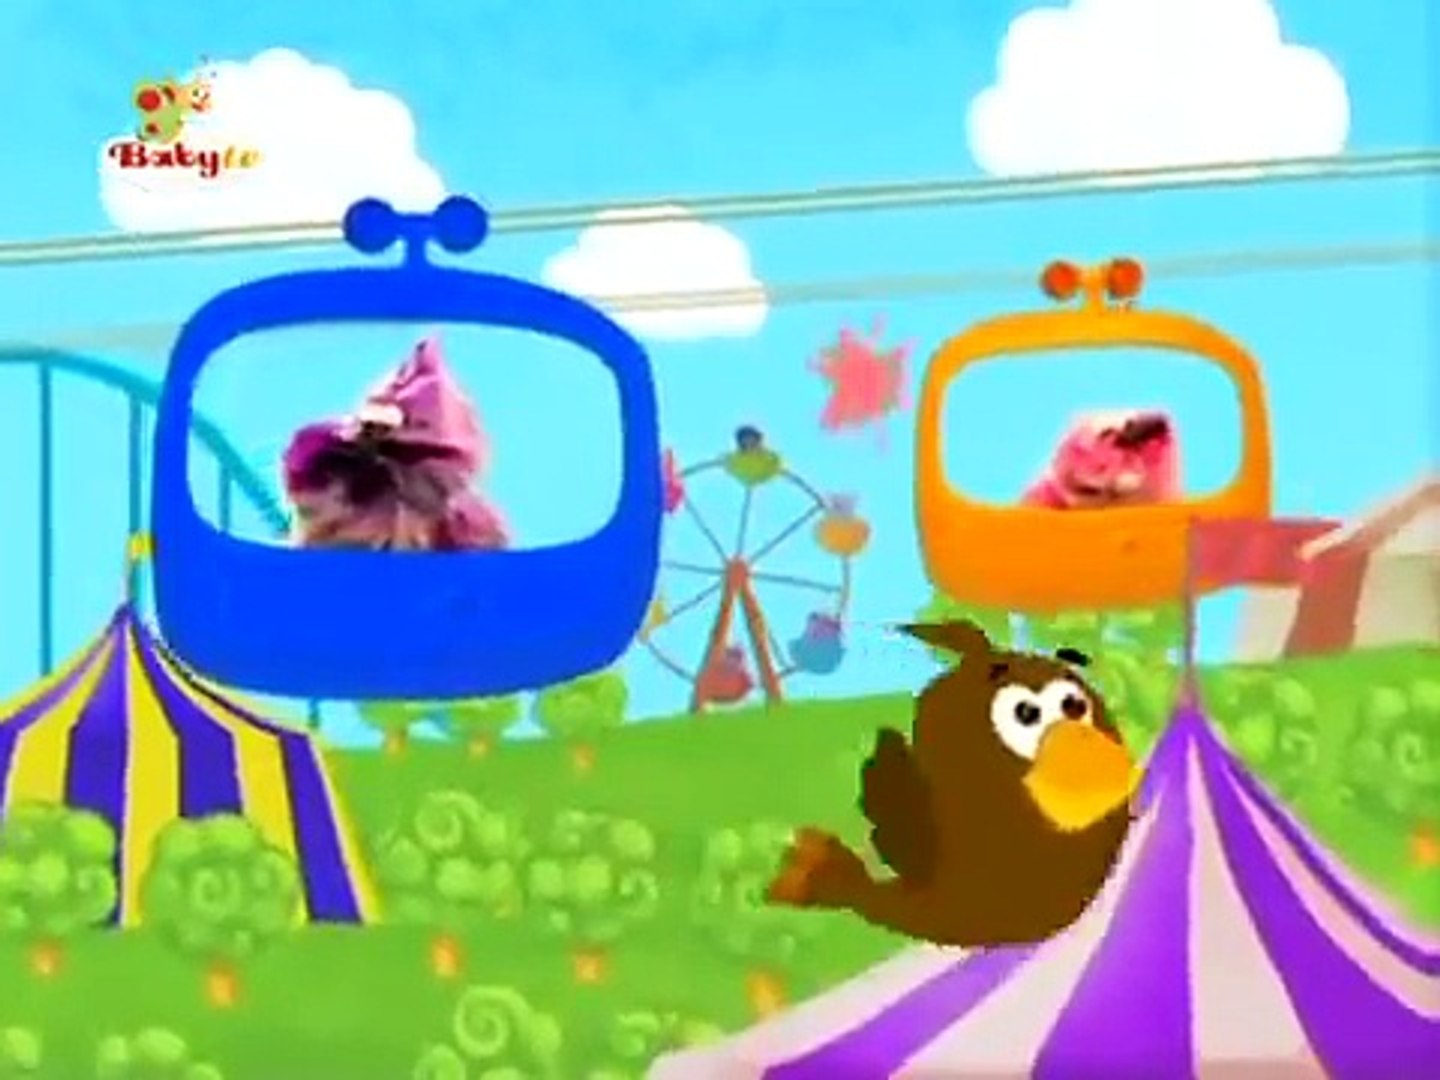 BabyTV The birds (with another voice) (english) - Dailymotion Video